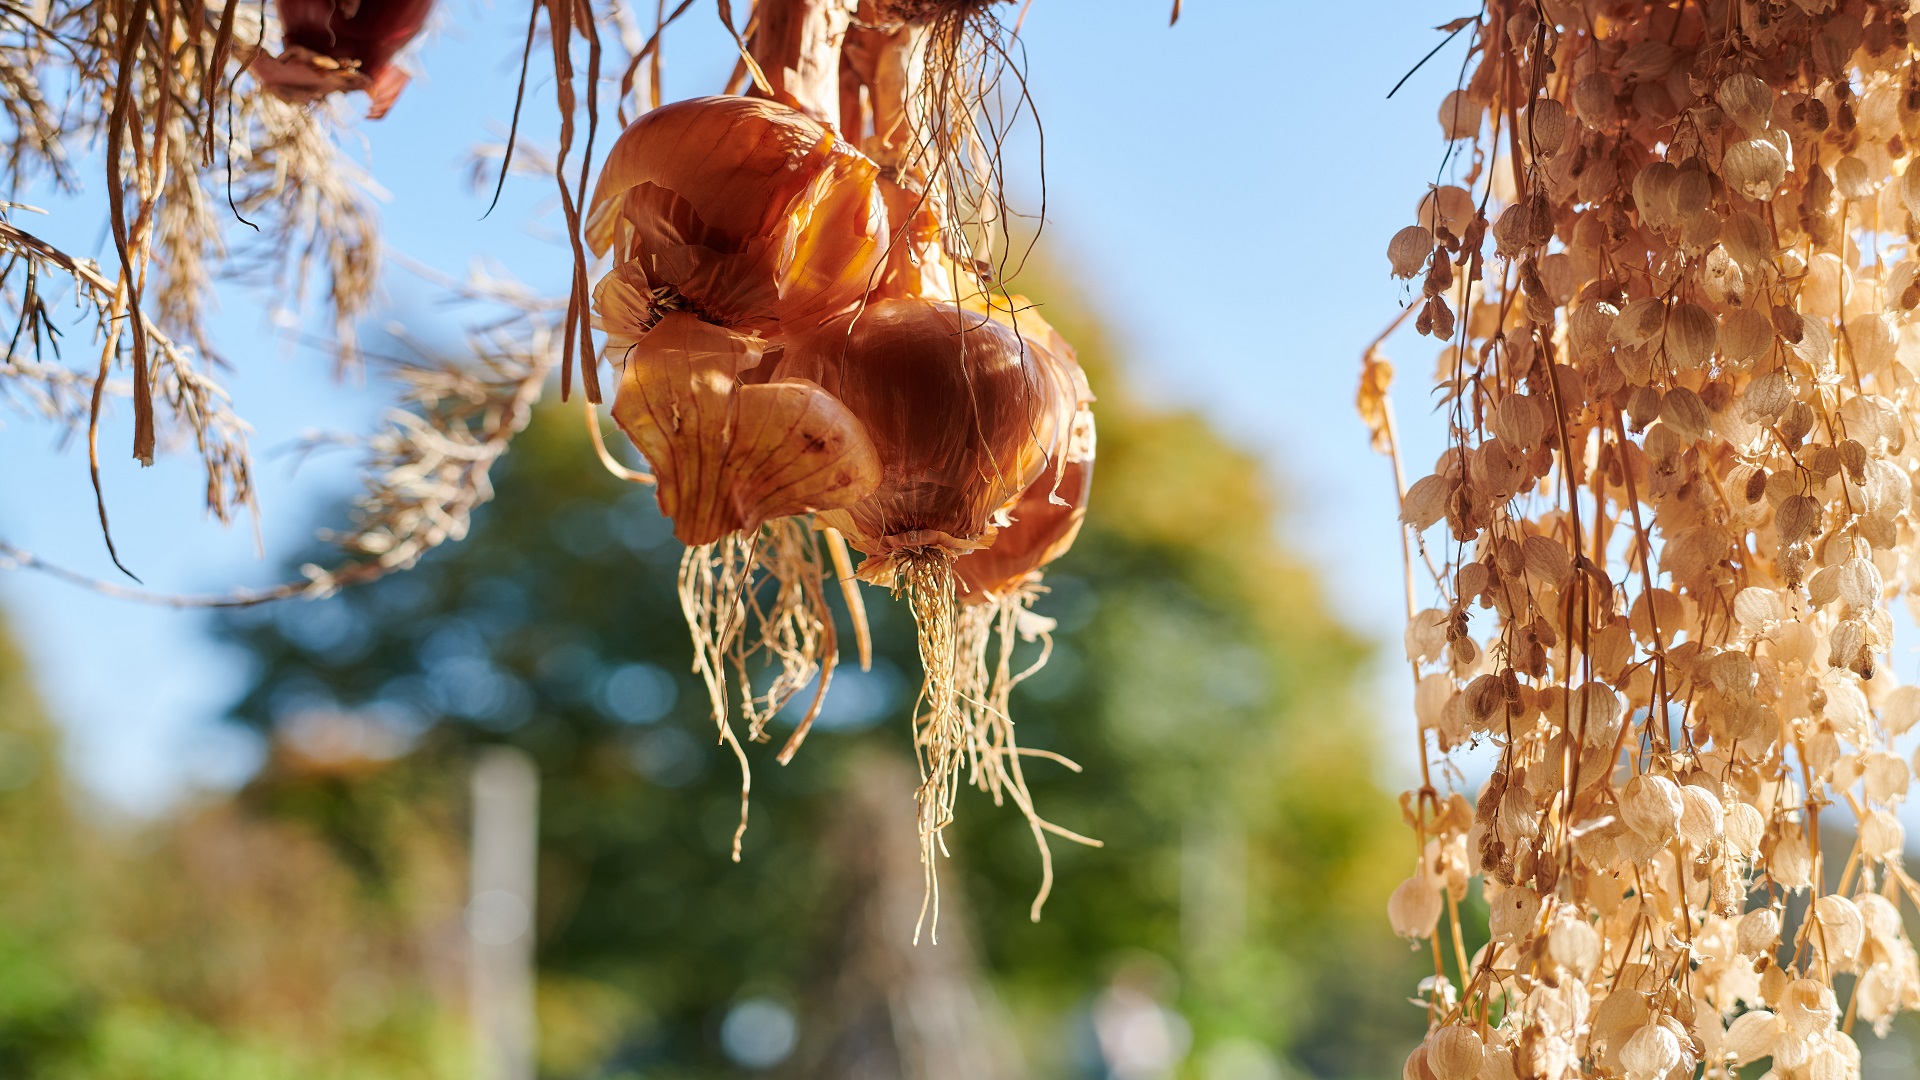 Hanging dried flowers and onions